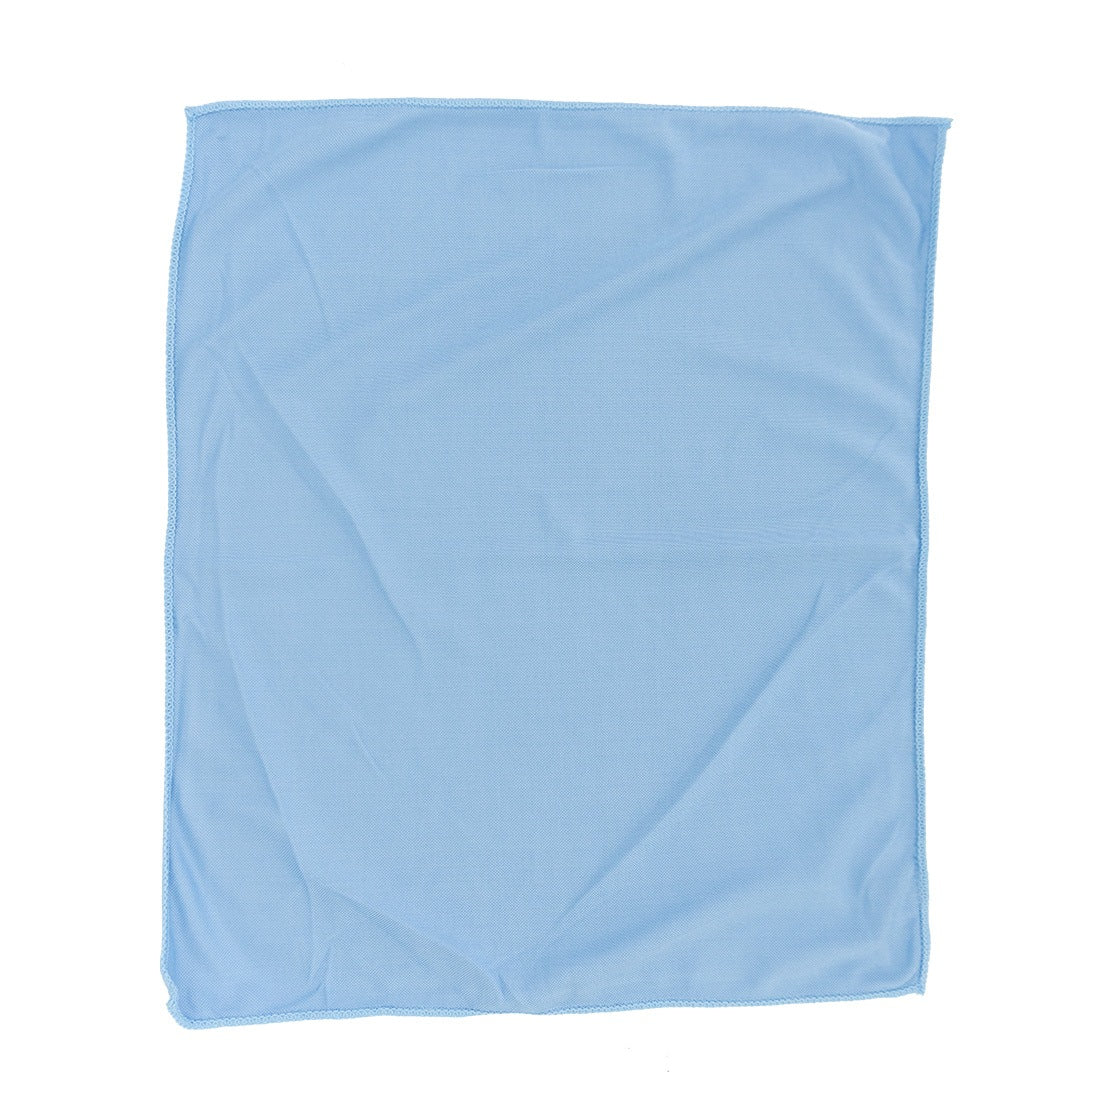 XERO Jolt Microfiber Towel Folded Laid Out Front View